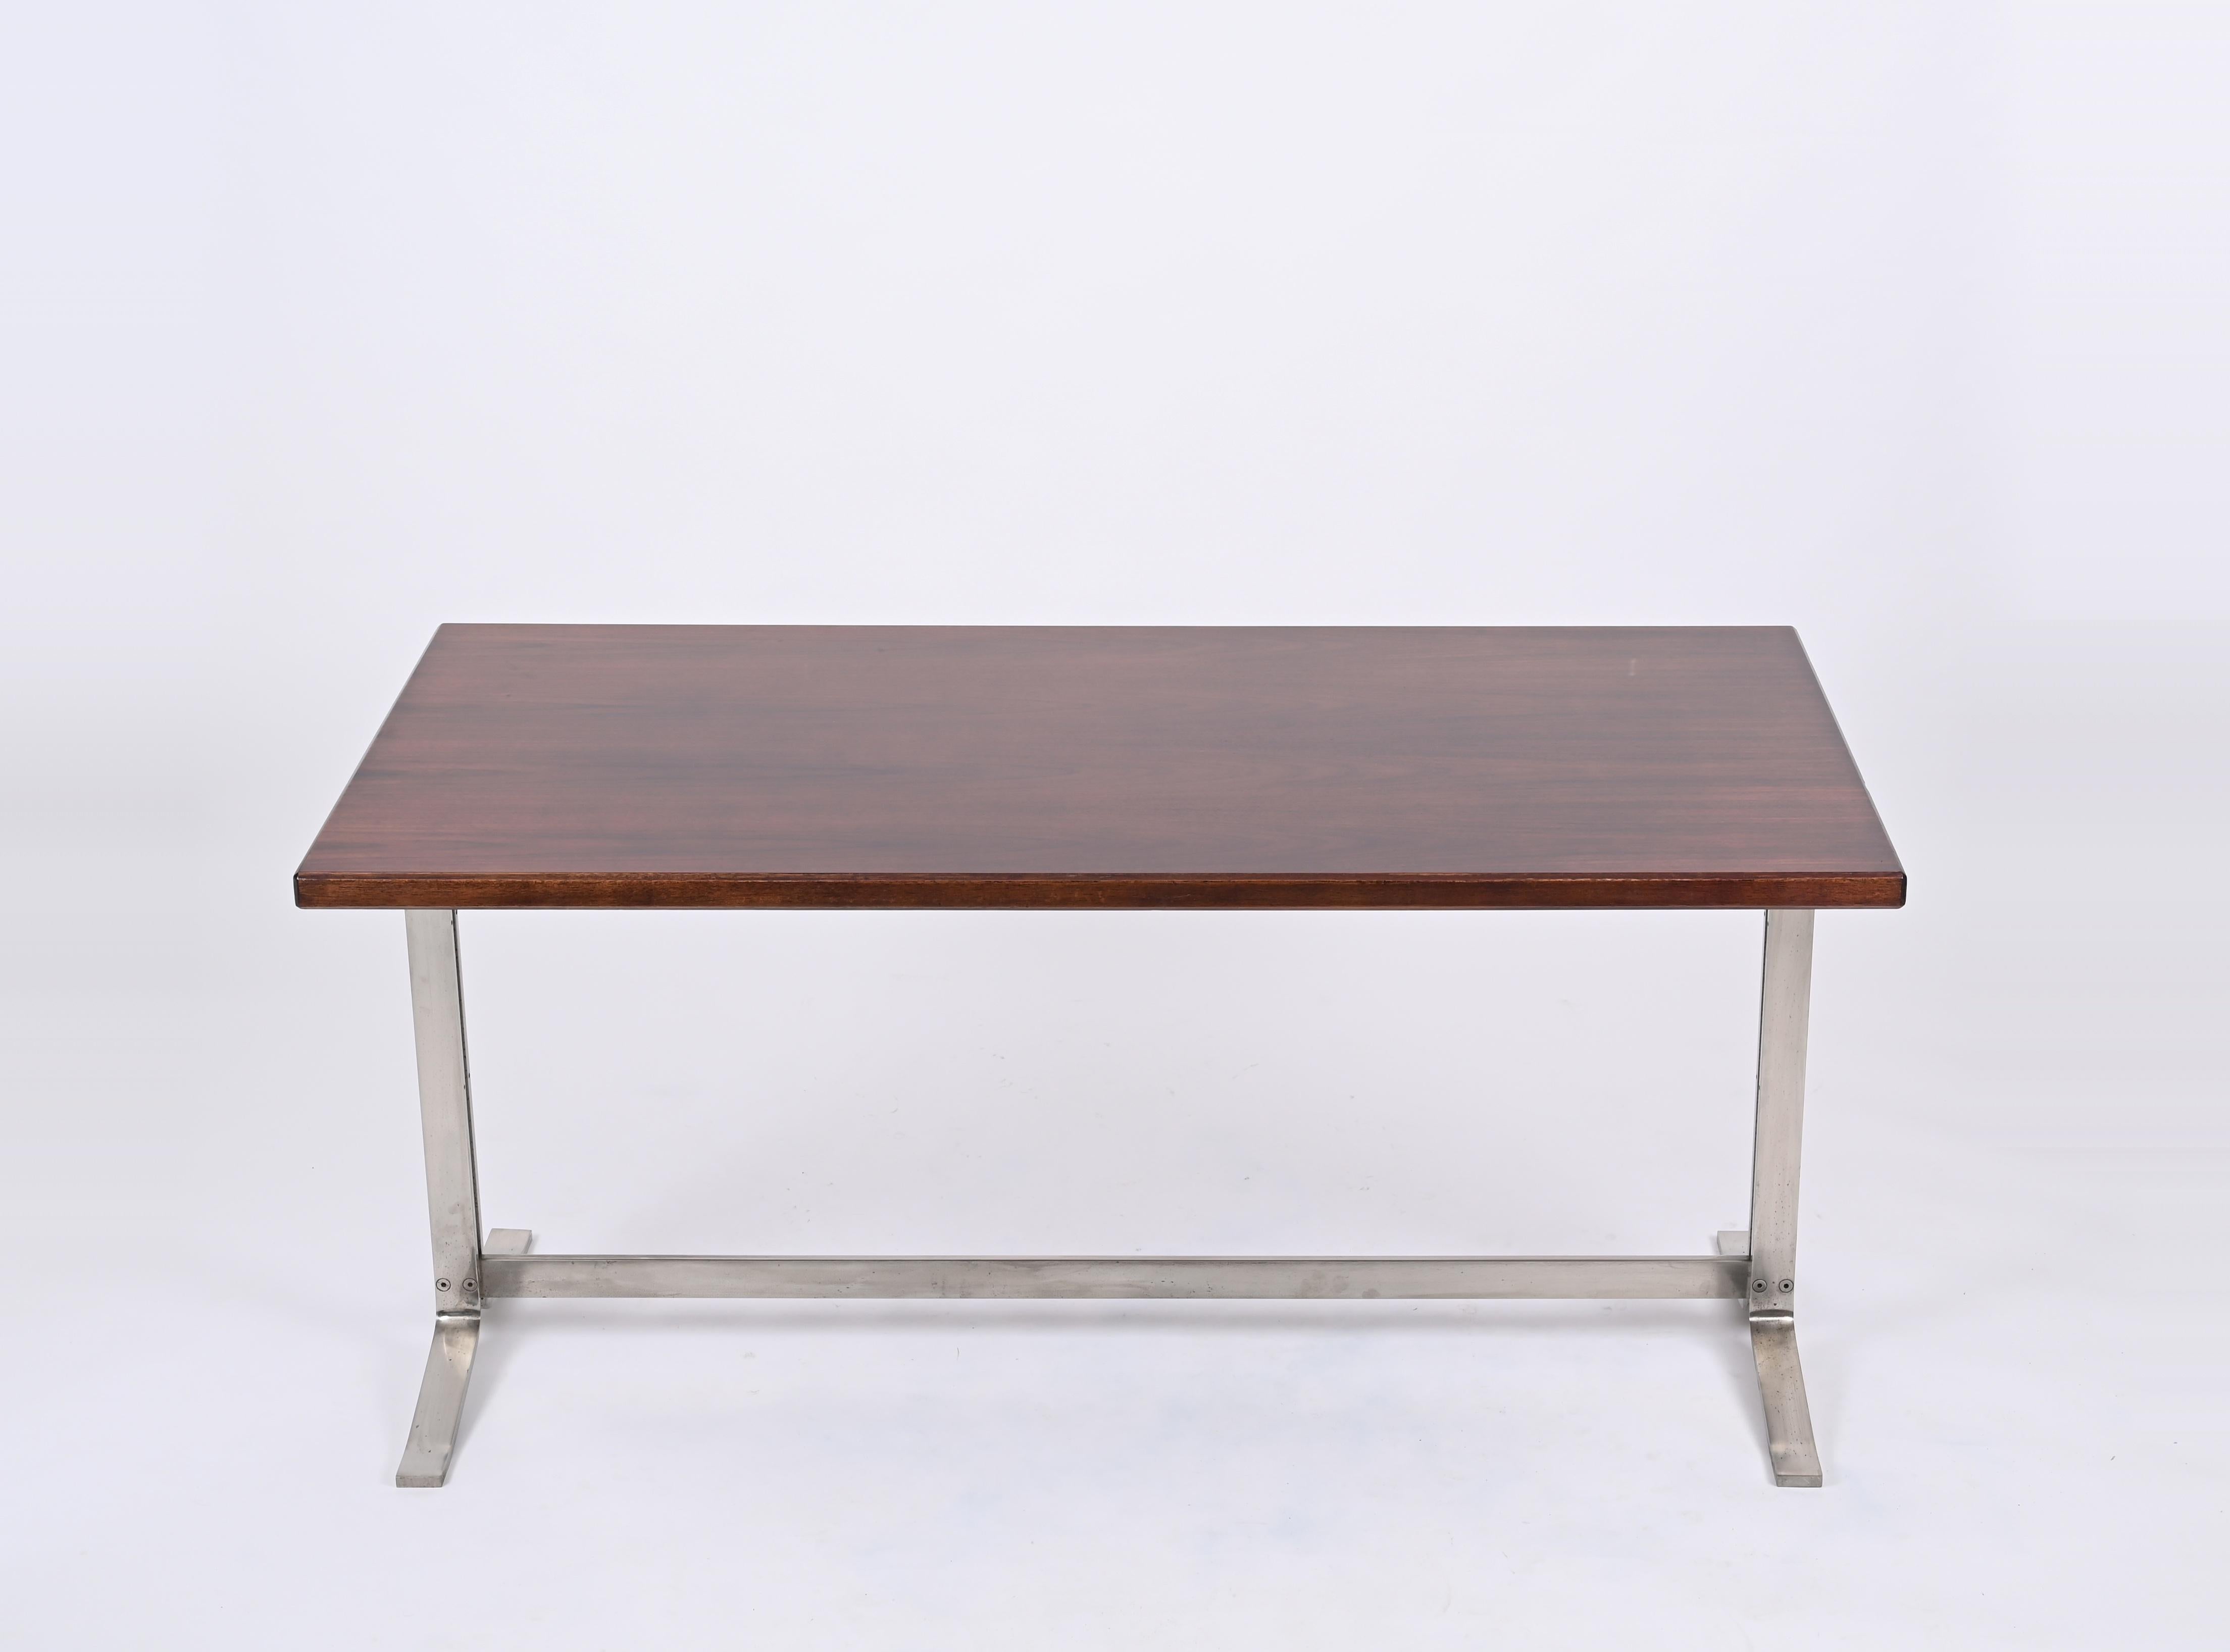 Midcentury Desk in Walnut and Steel by Moscatelli for Formanova, Italy, 1965 For Sale 5